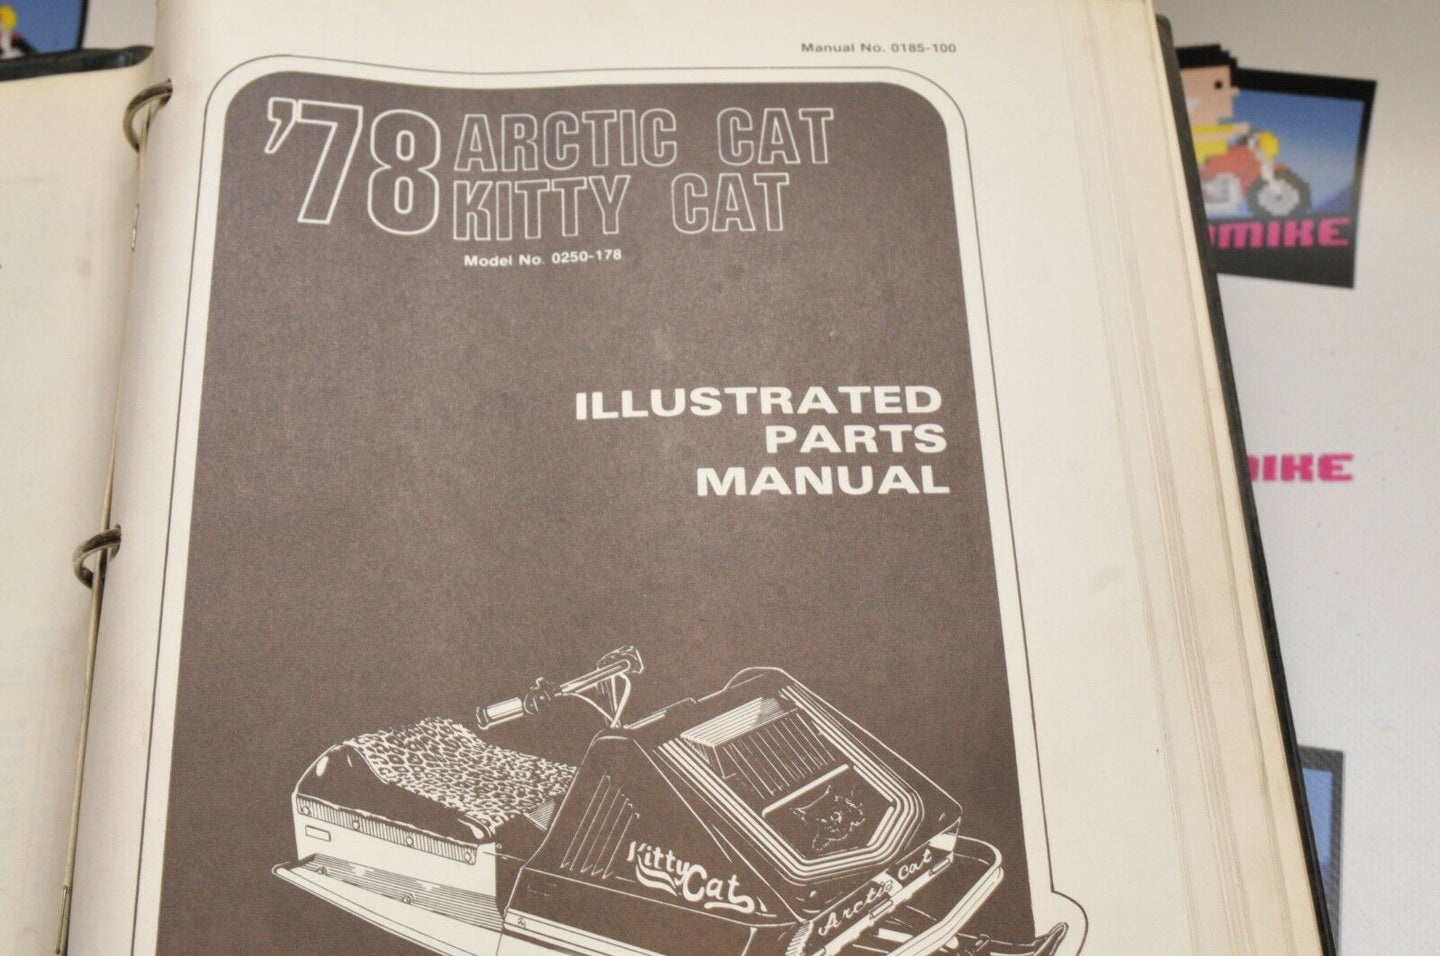 Genuine ARCTIC CAT Factory ILLUSTRATED PARTS MANUAL - 1978 KITTY 0185-100